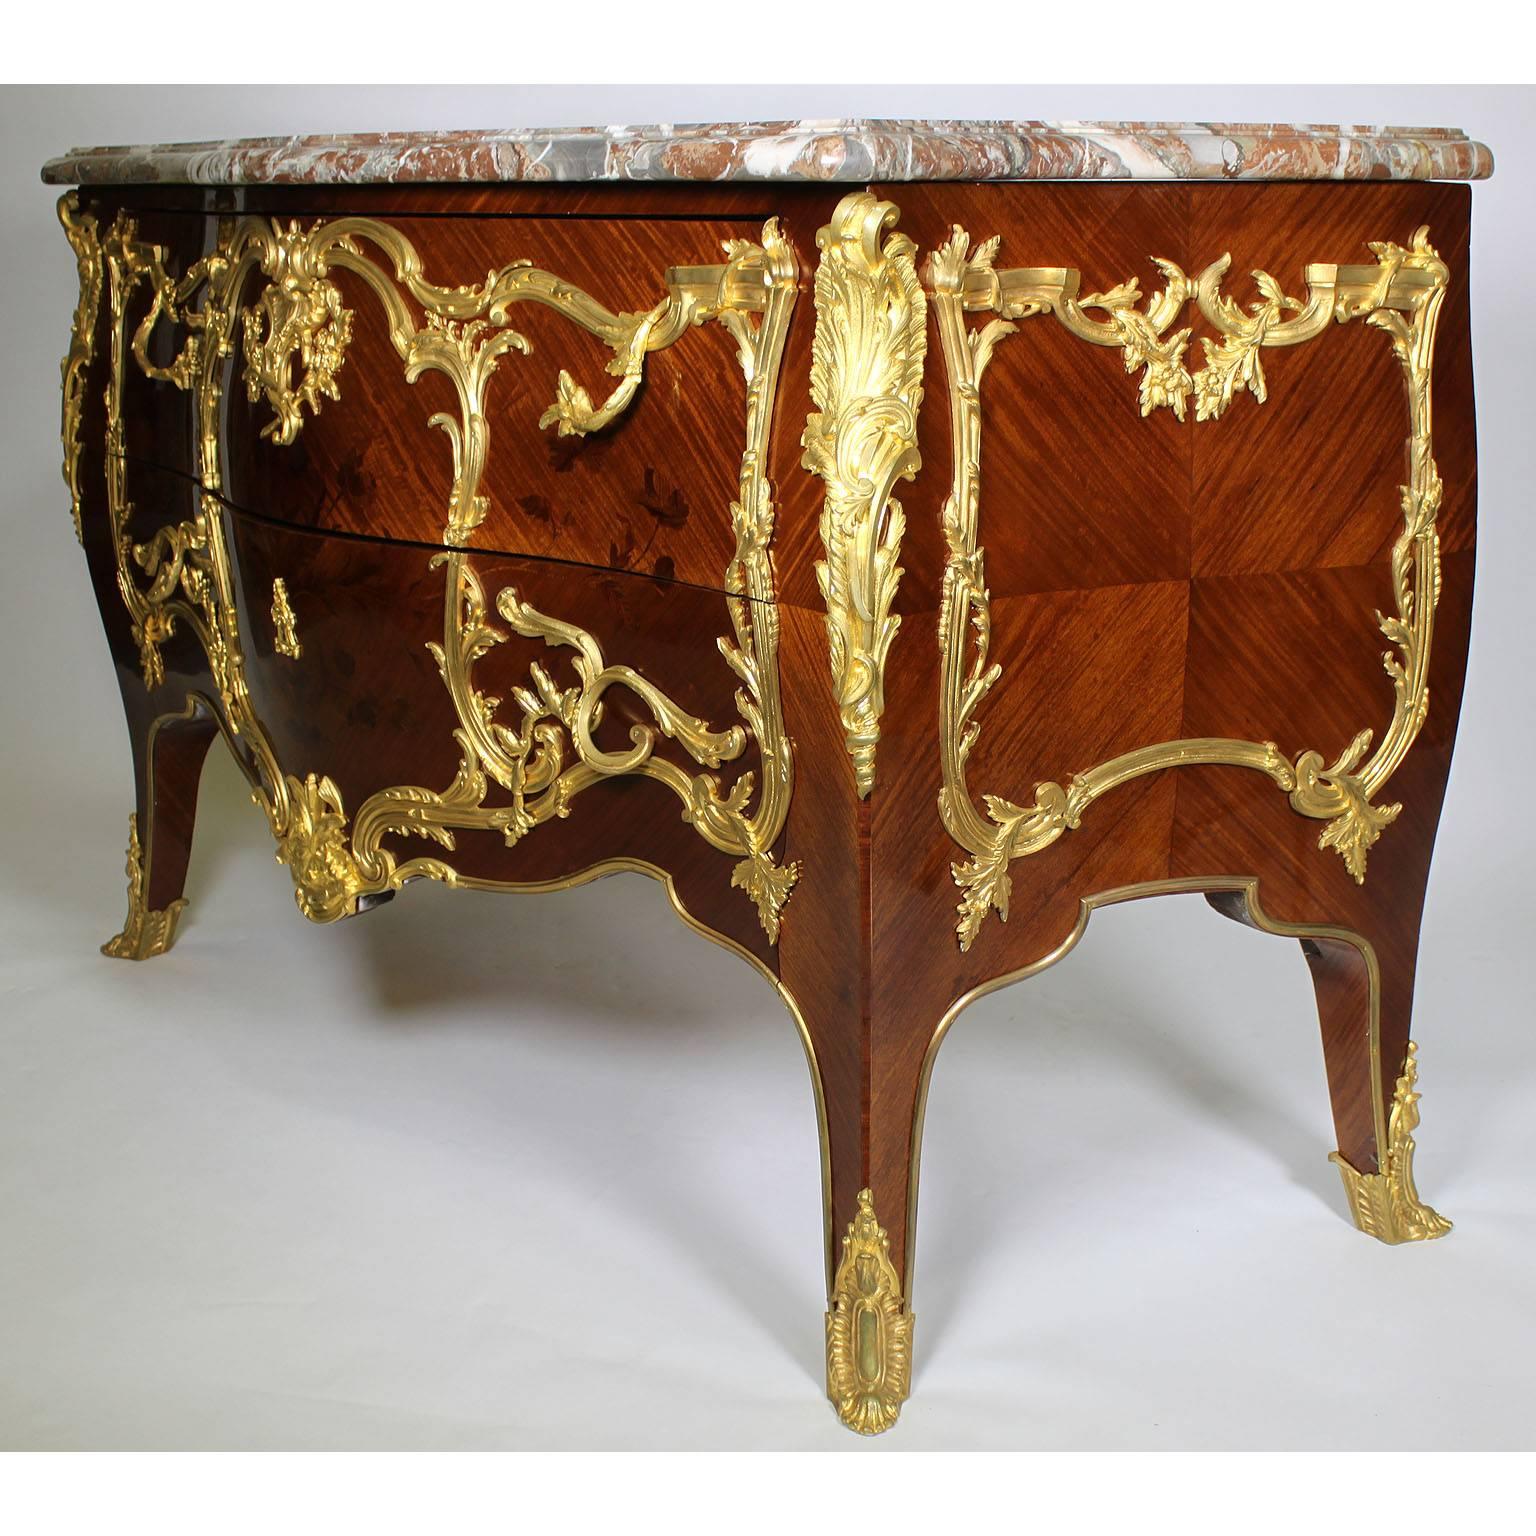 French 19th-20th century Louis XV Style Gilt Bronze Mounted Marquetry Commode For Sale 1